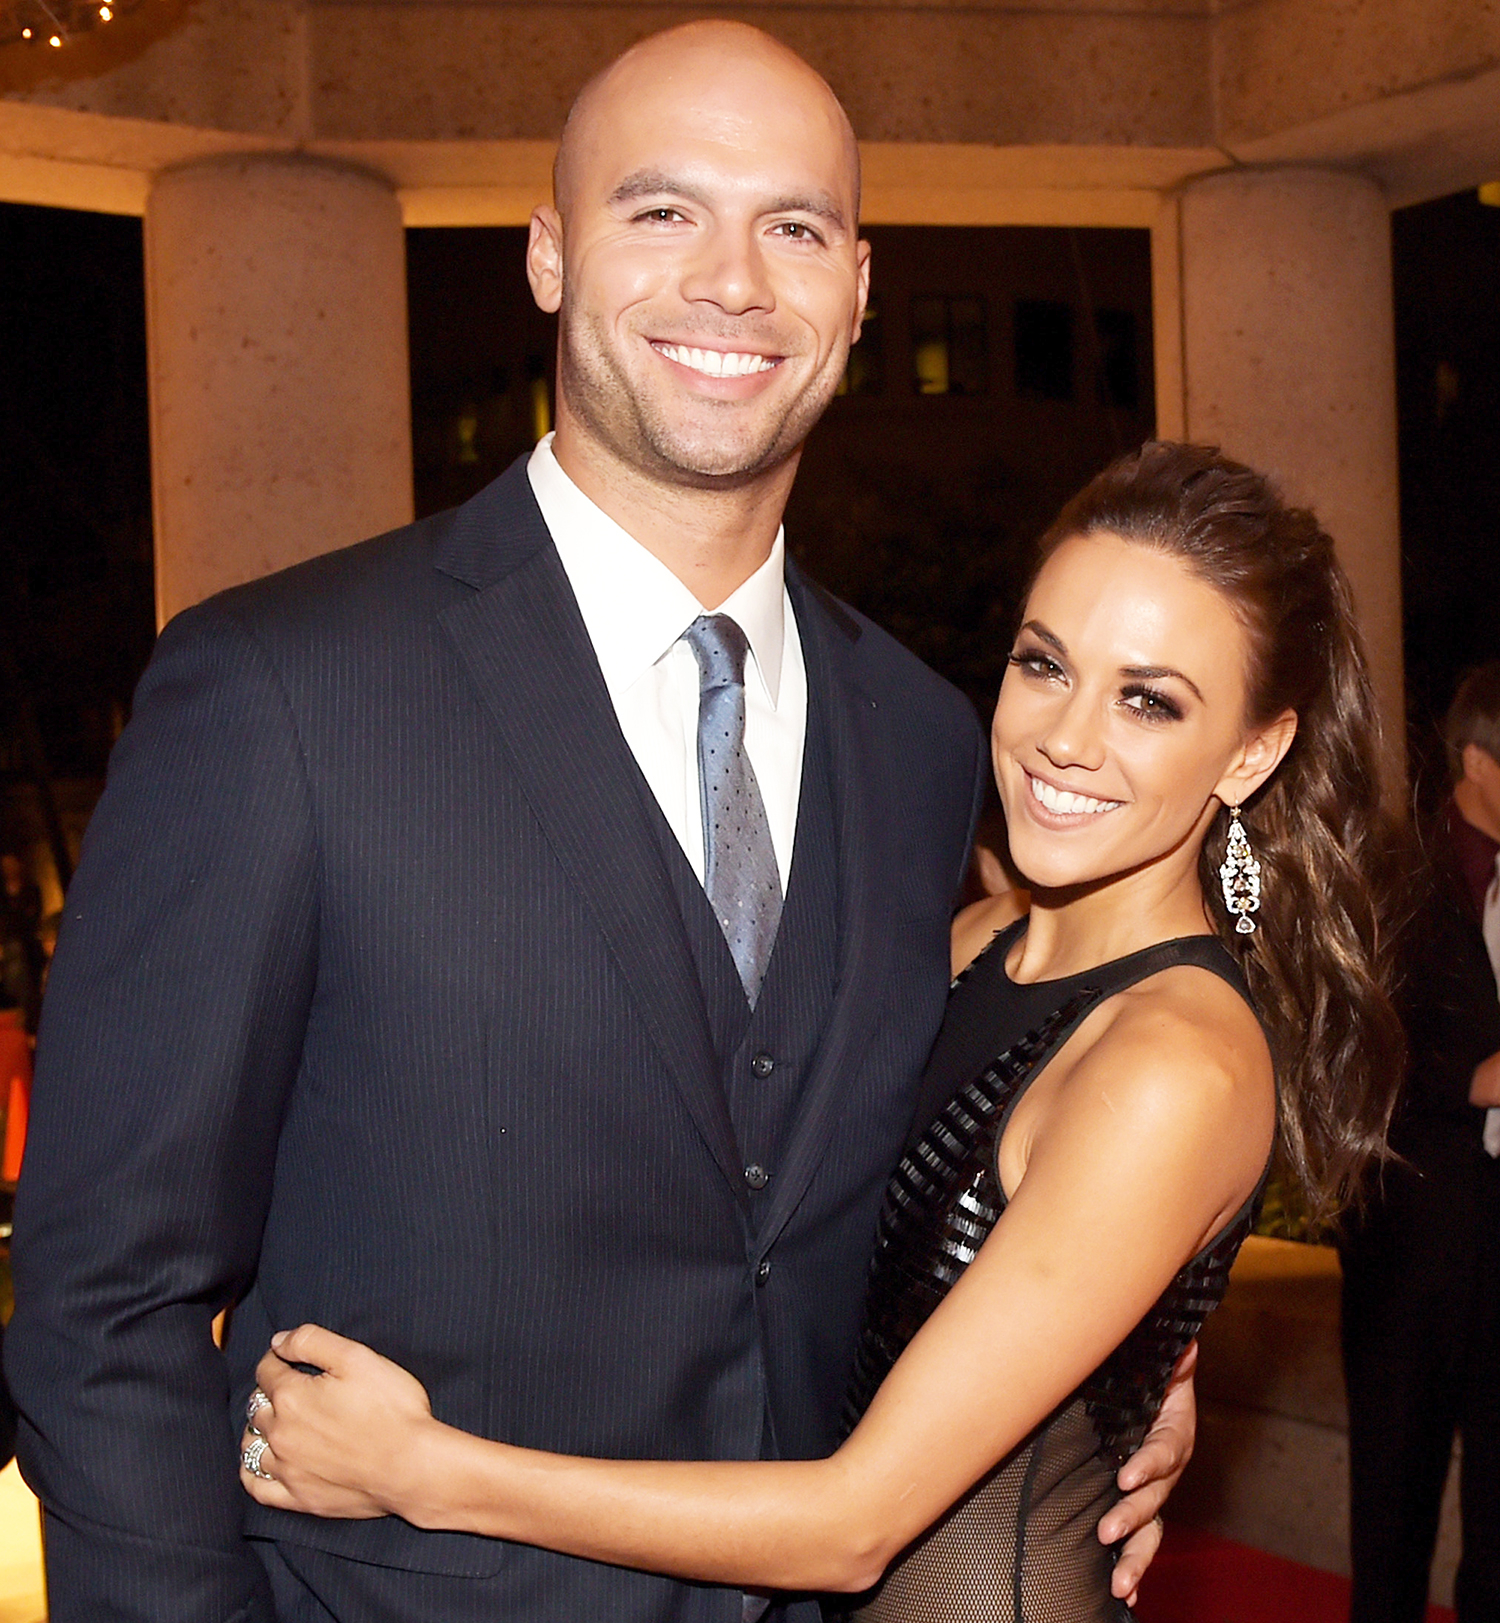 Jana Kramers Husband Allegedly Cheated on image picture